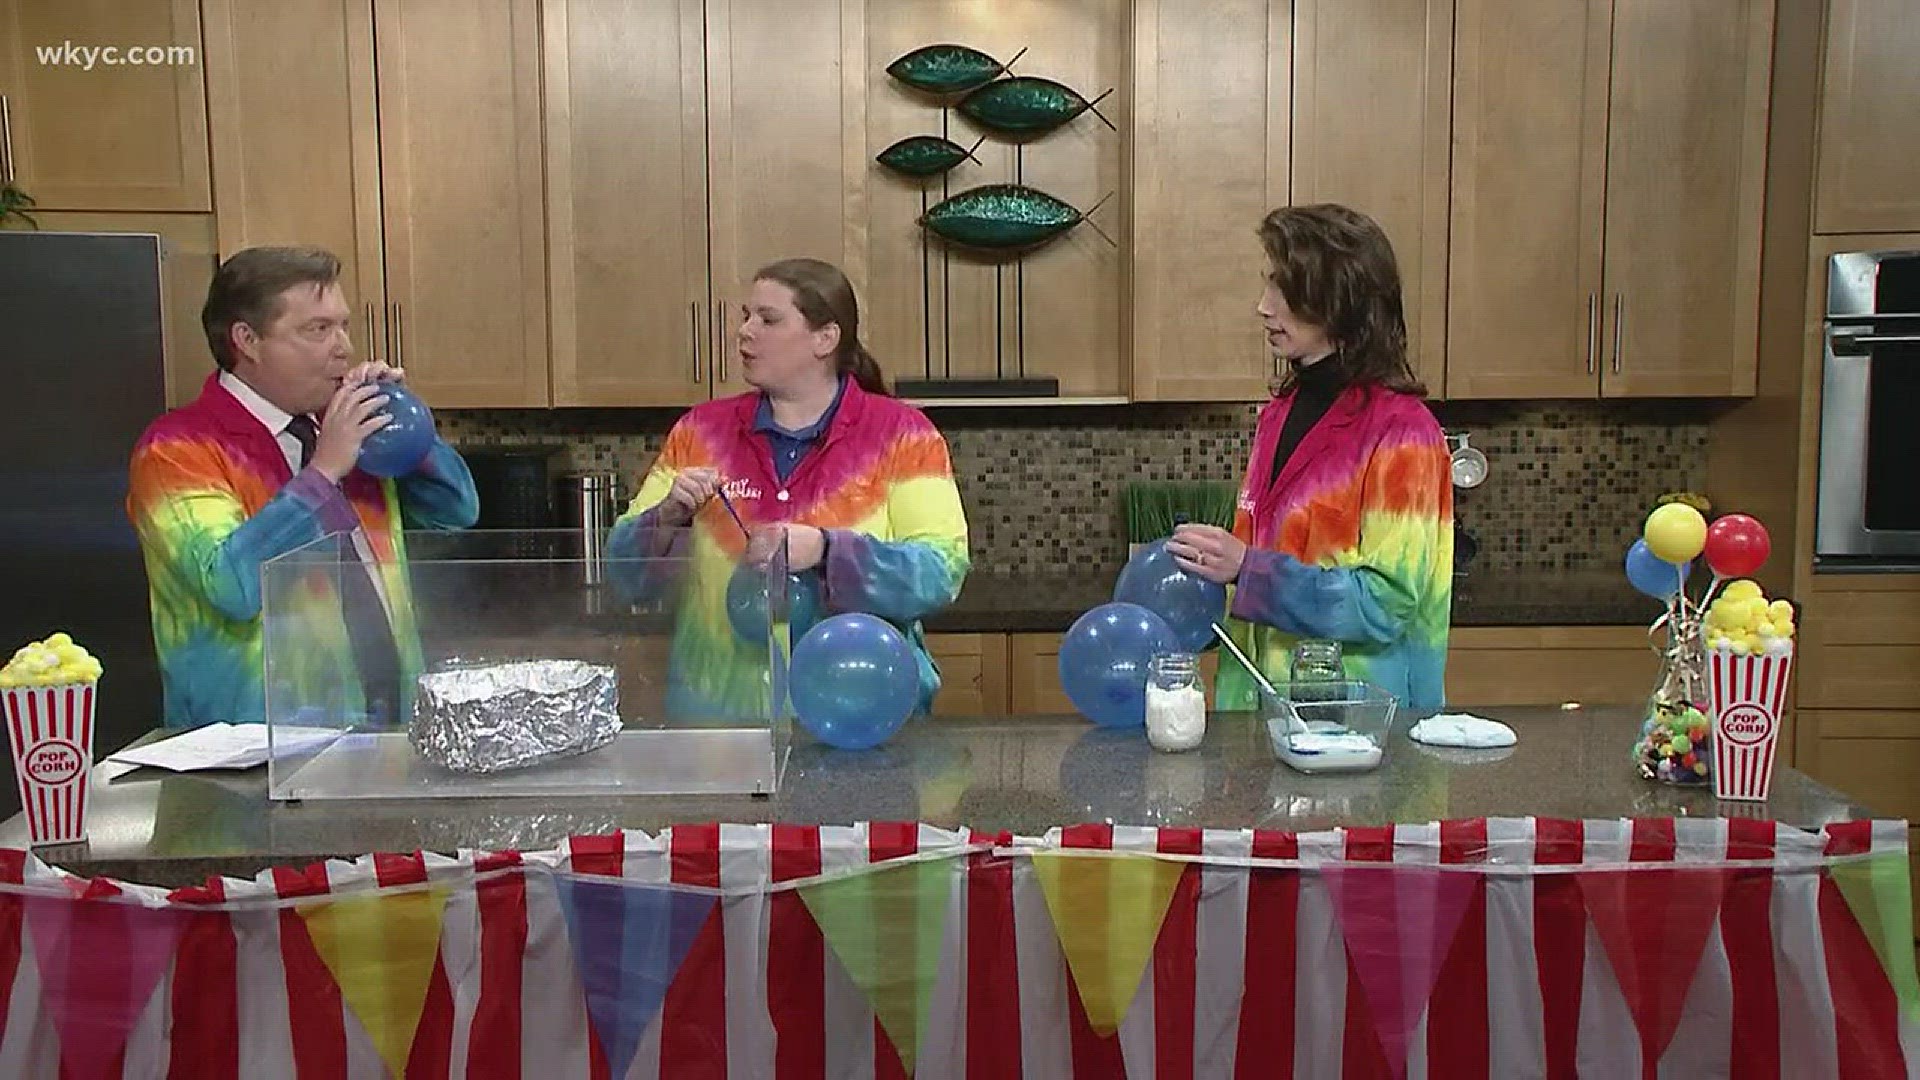 The Great Lakes Science Center visited Donovan Live! to showcase their Curiosity Carnival, and Jimmy and Betsy found their voices.